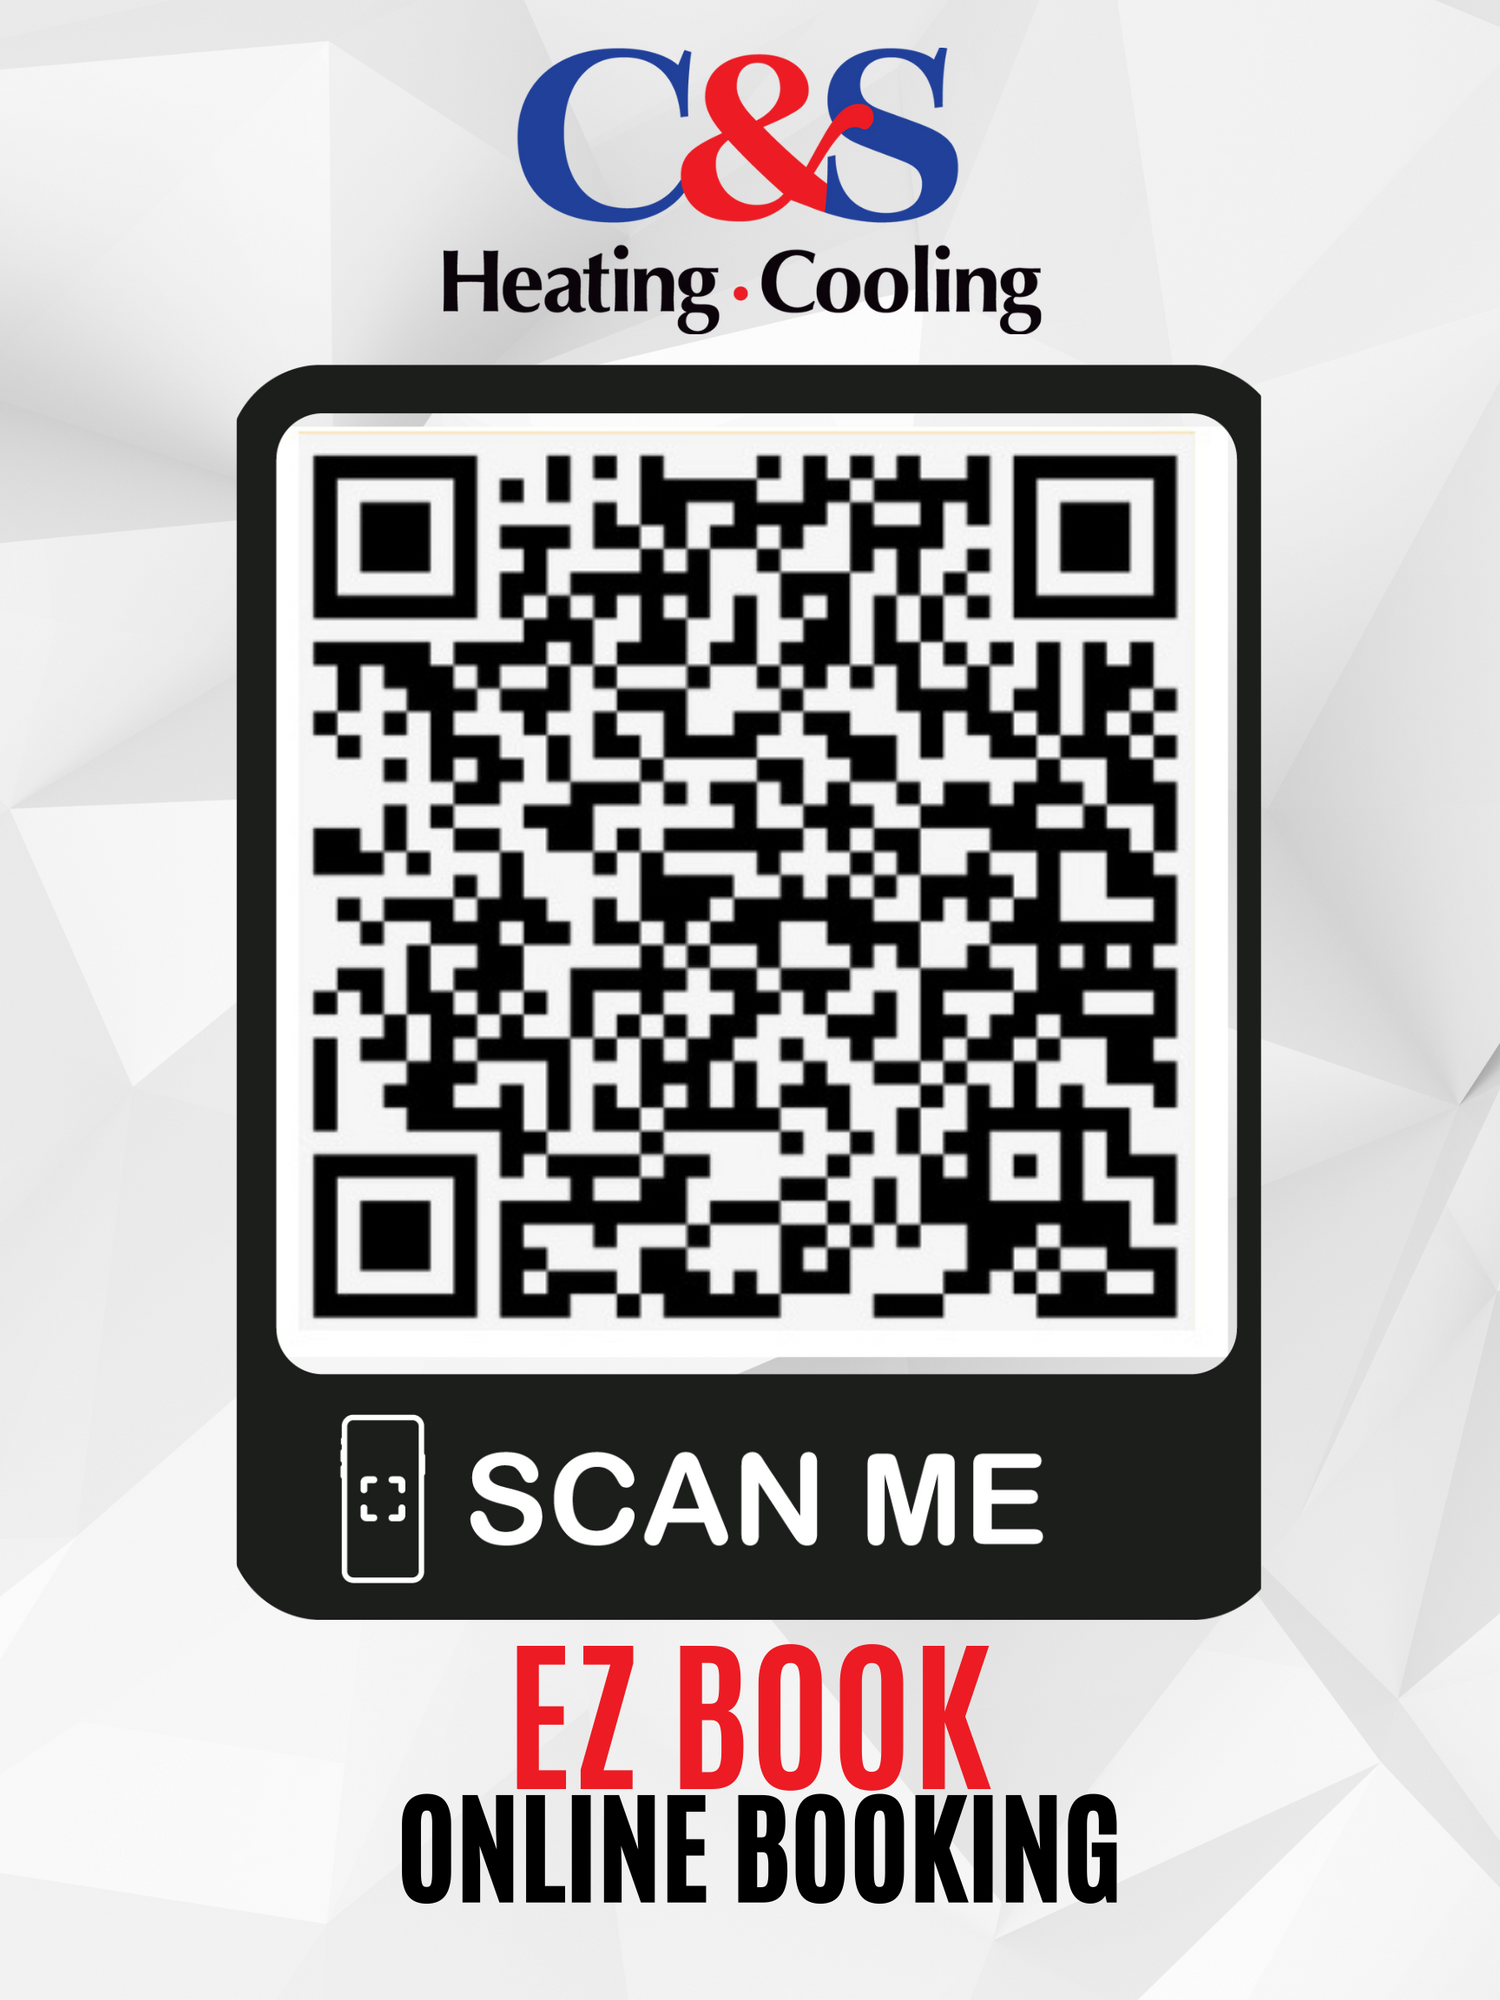 Scan & Share our qr code